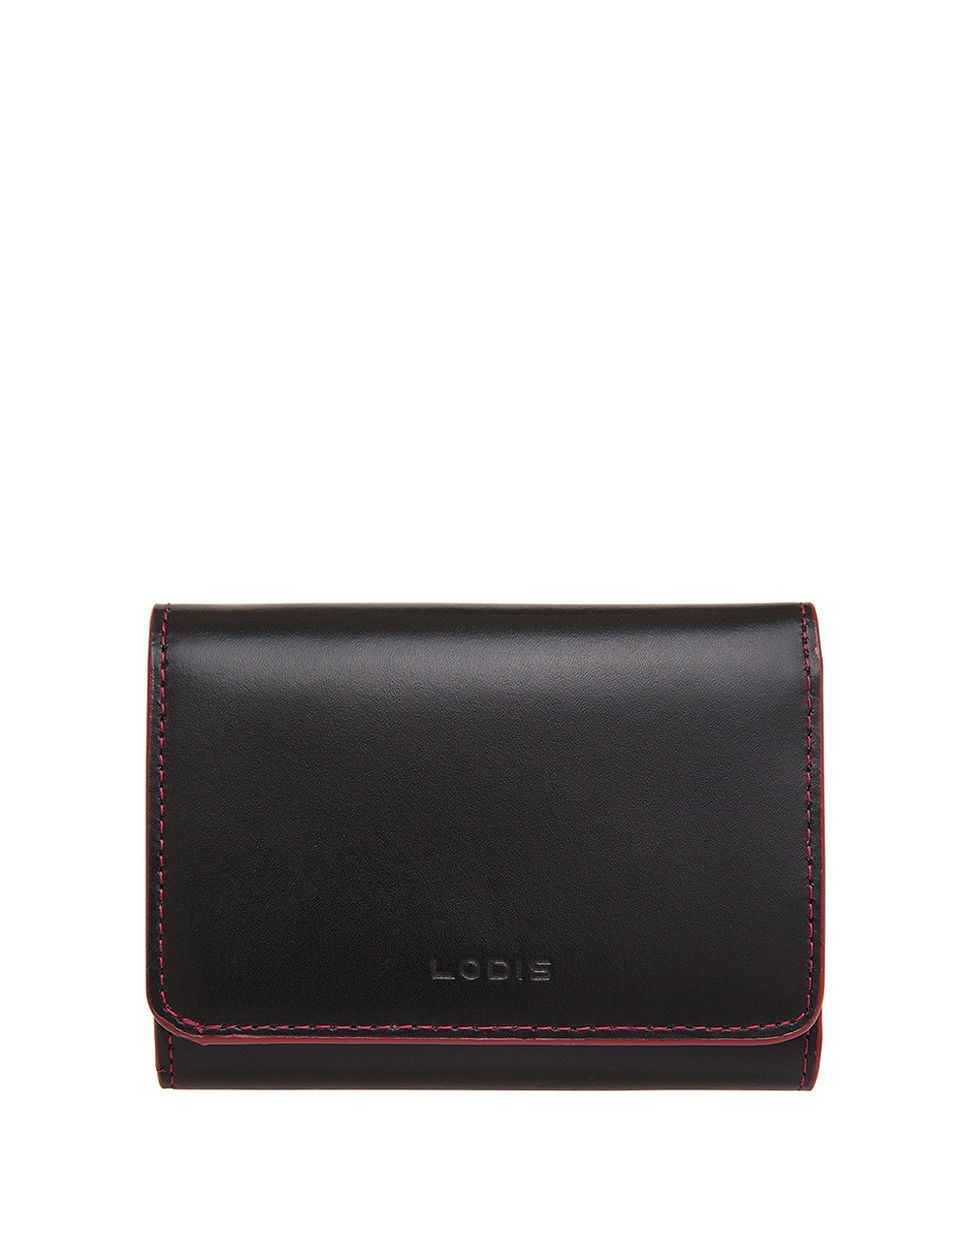 Lodis Mallory Leather French Purse Wallet in Black | Lyst